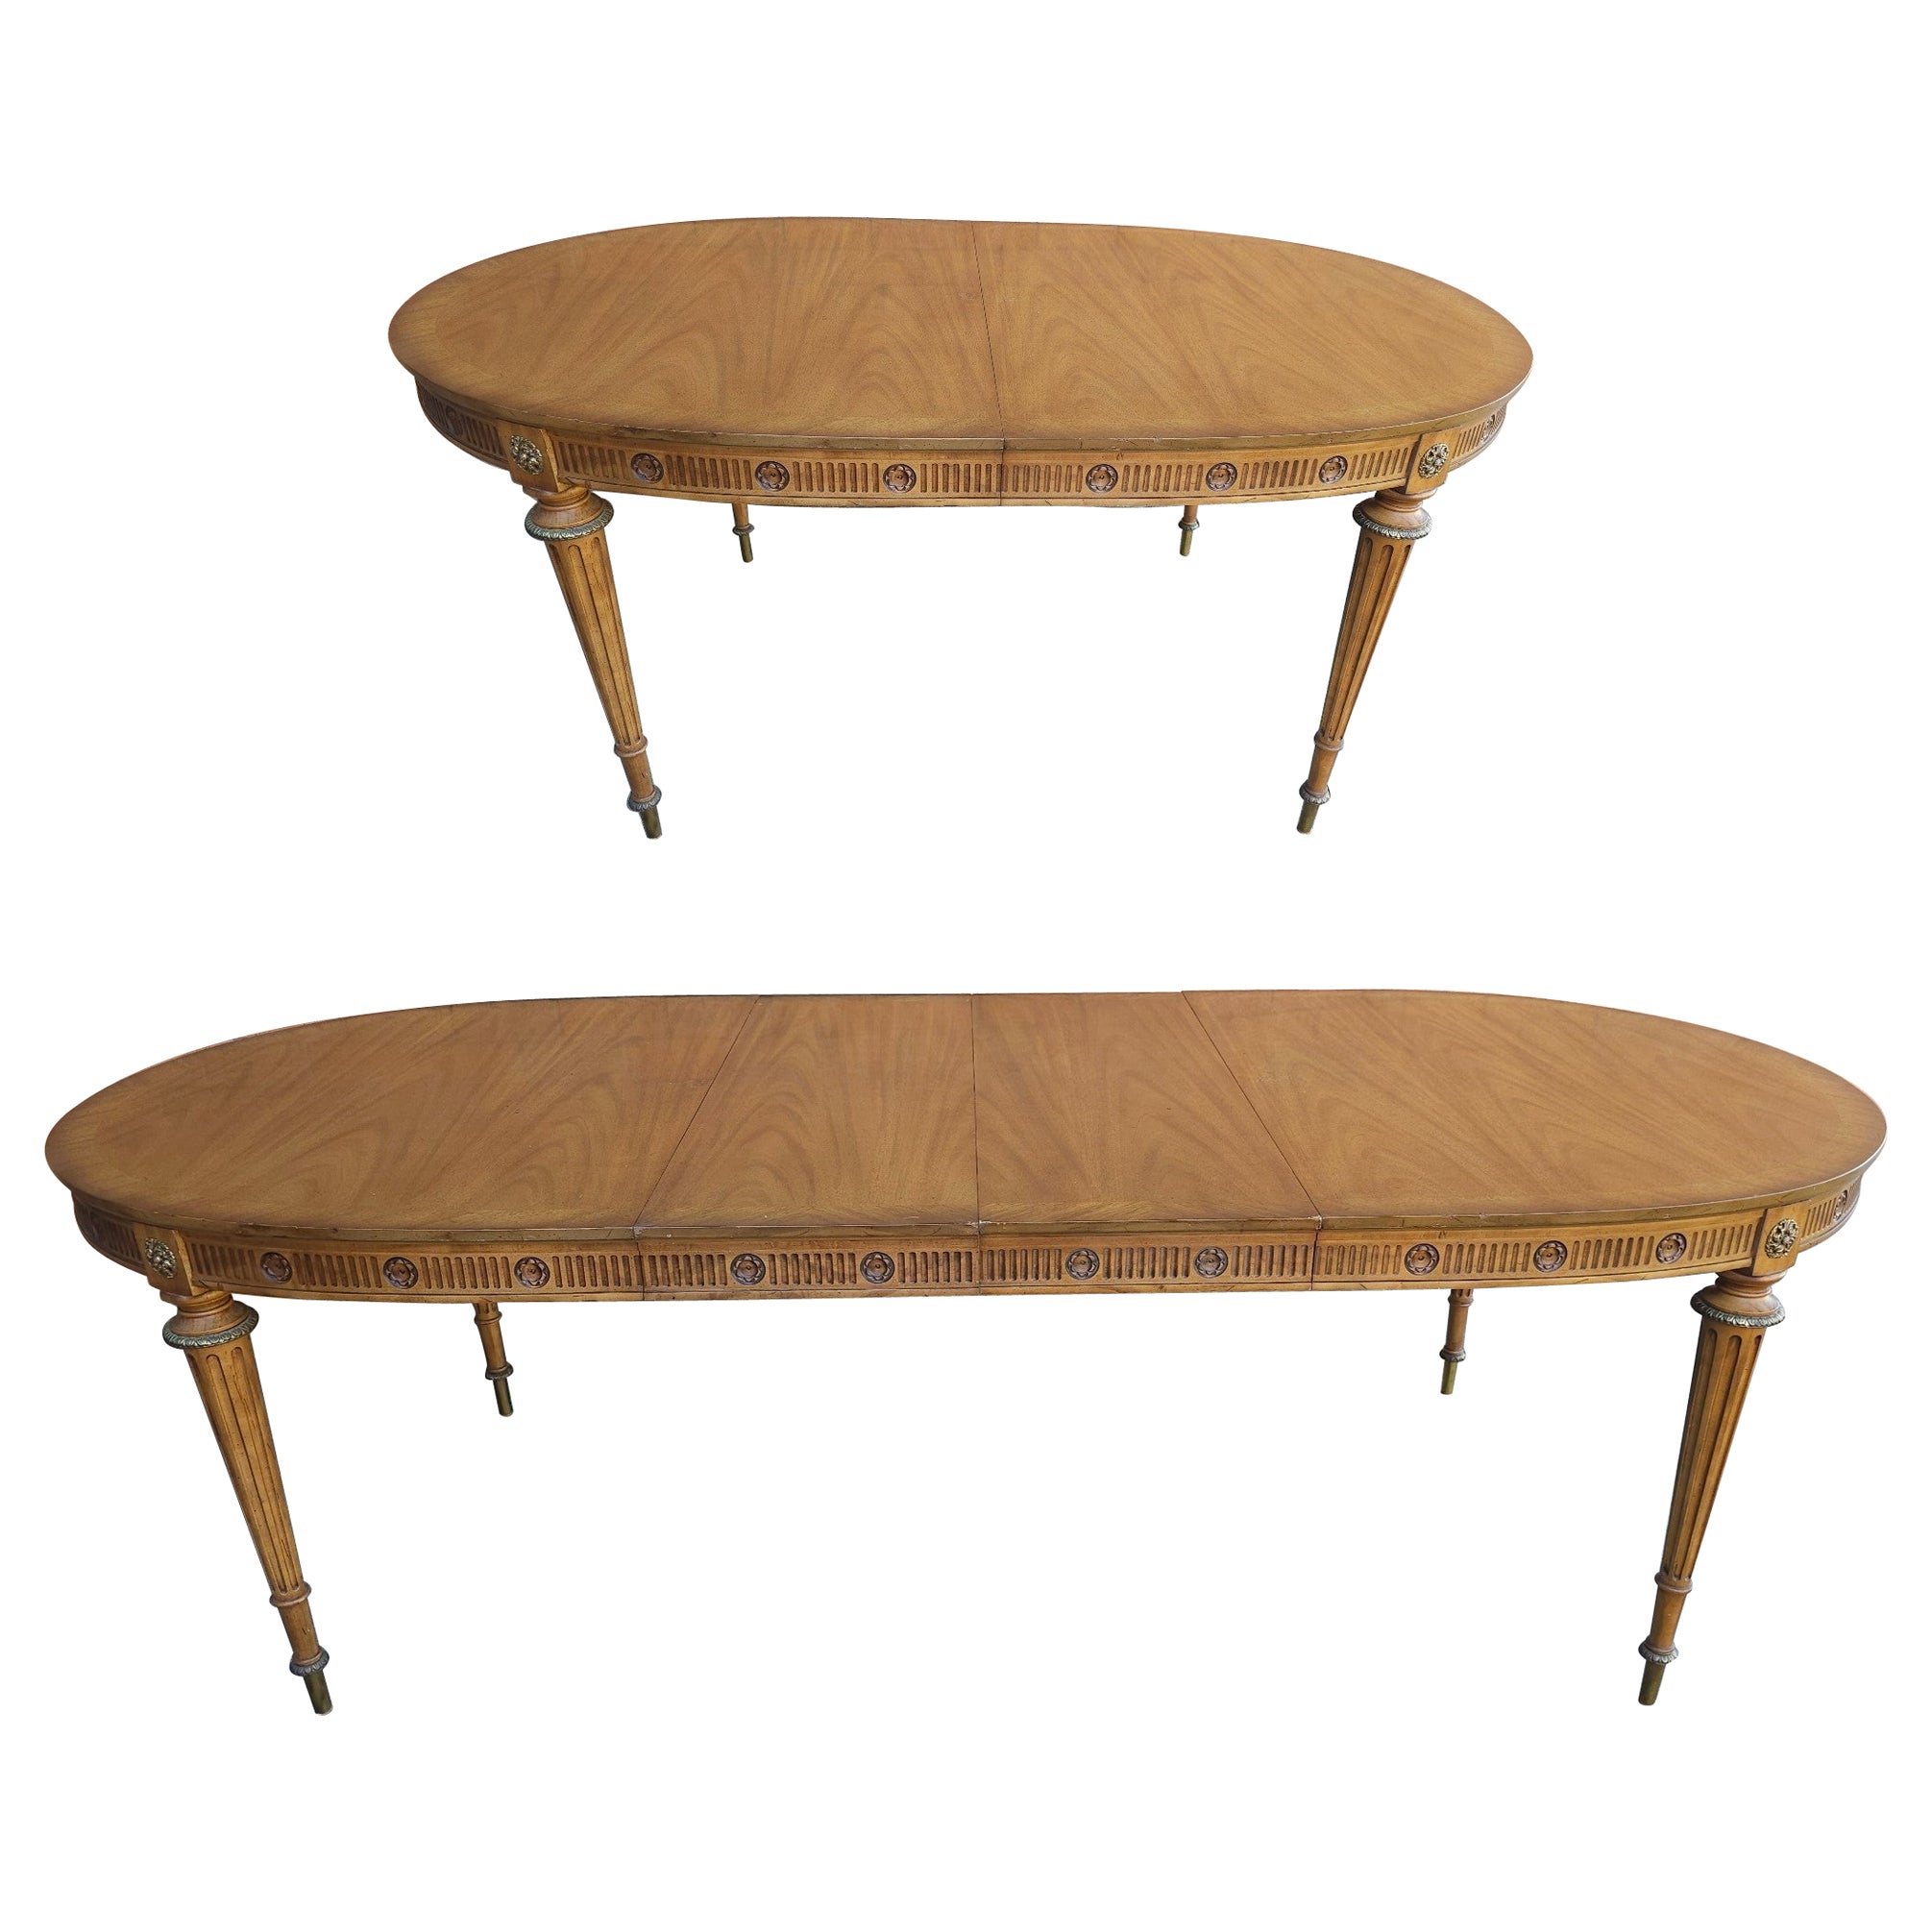 Louis XVI Brass Mounted French Walnut Oval Extension Dining Table W/ 2 Leaves For Sale